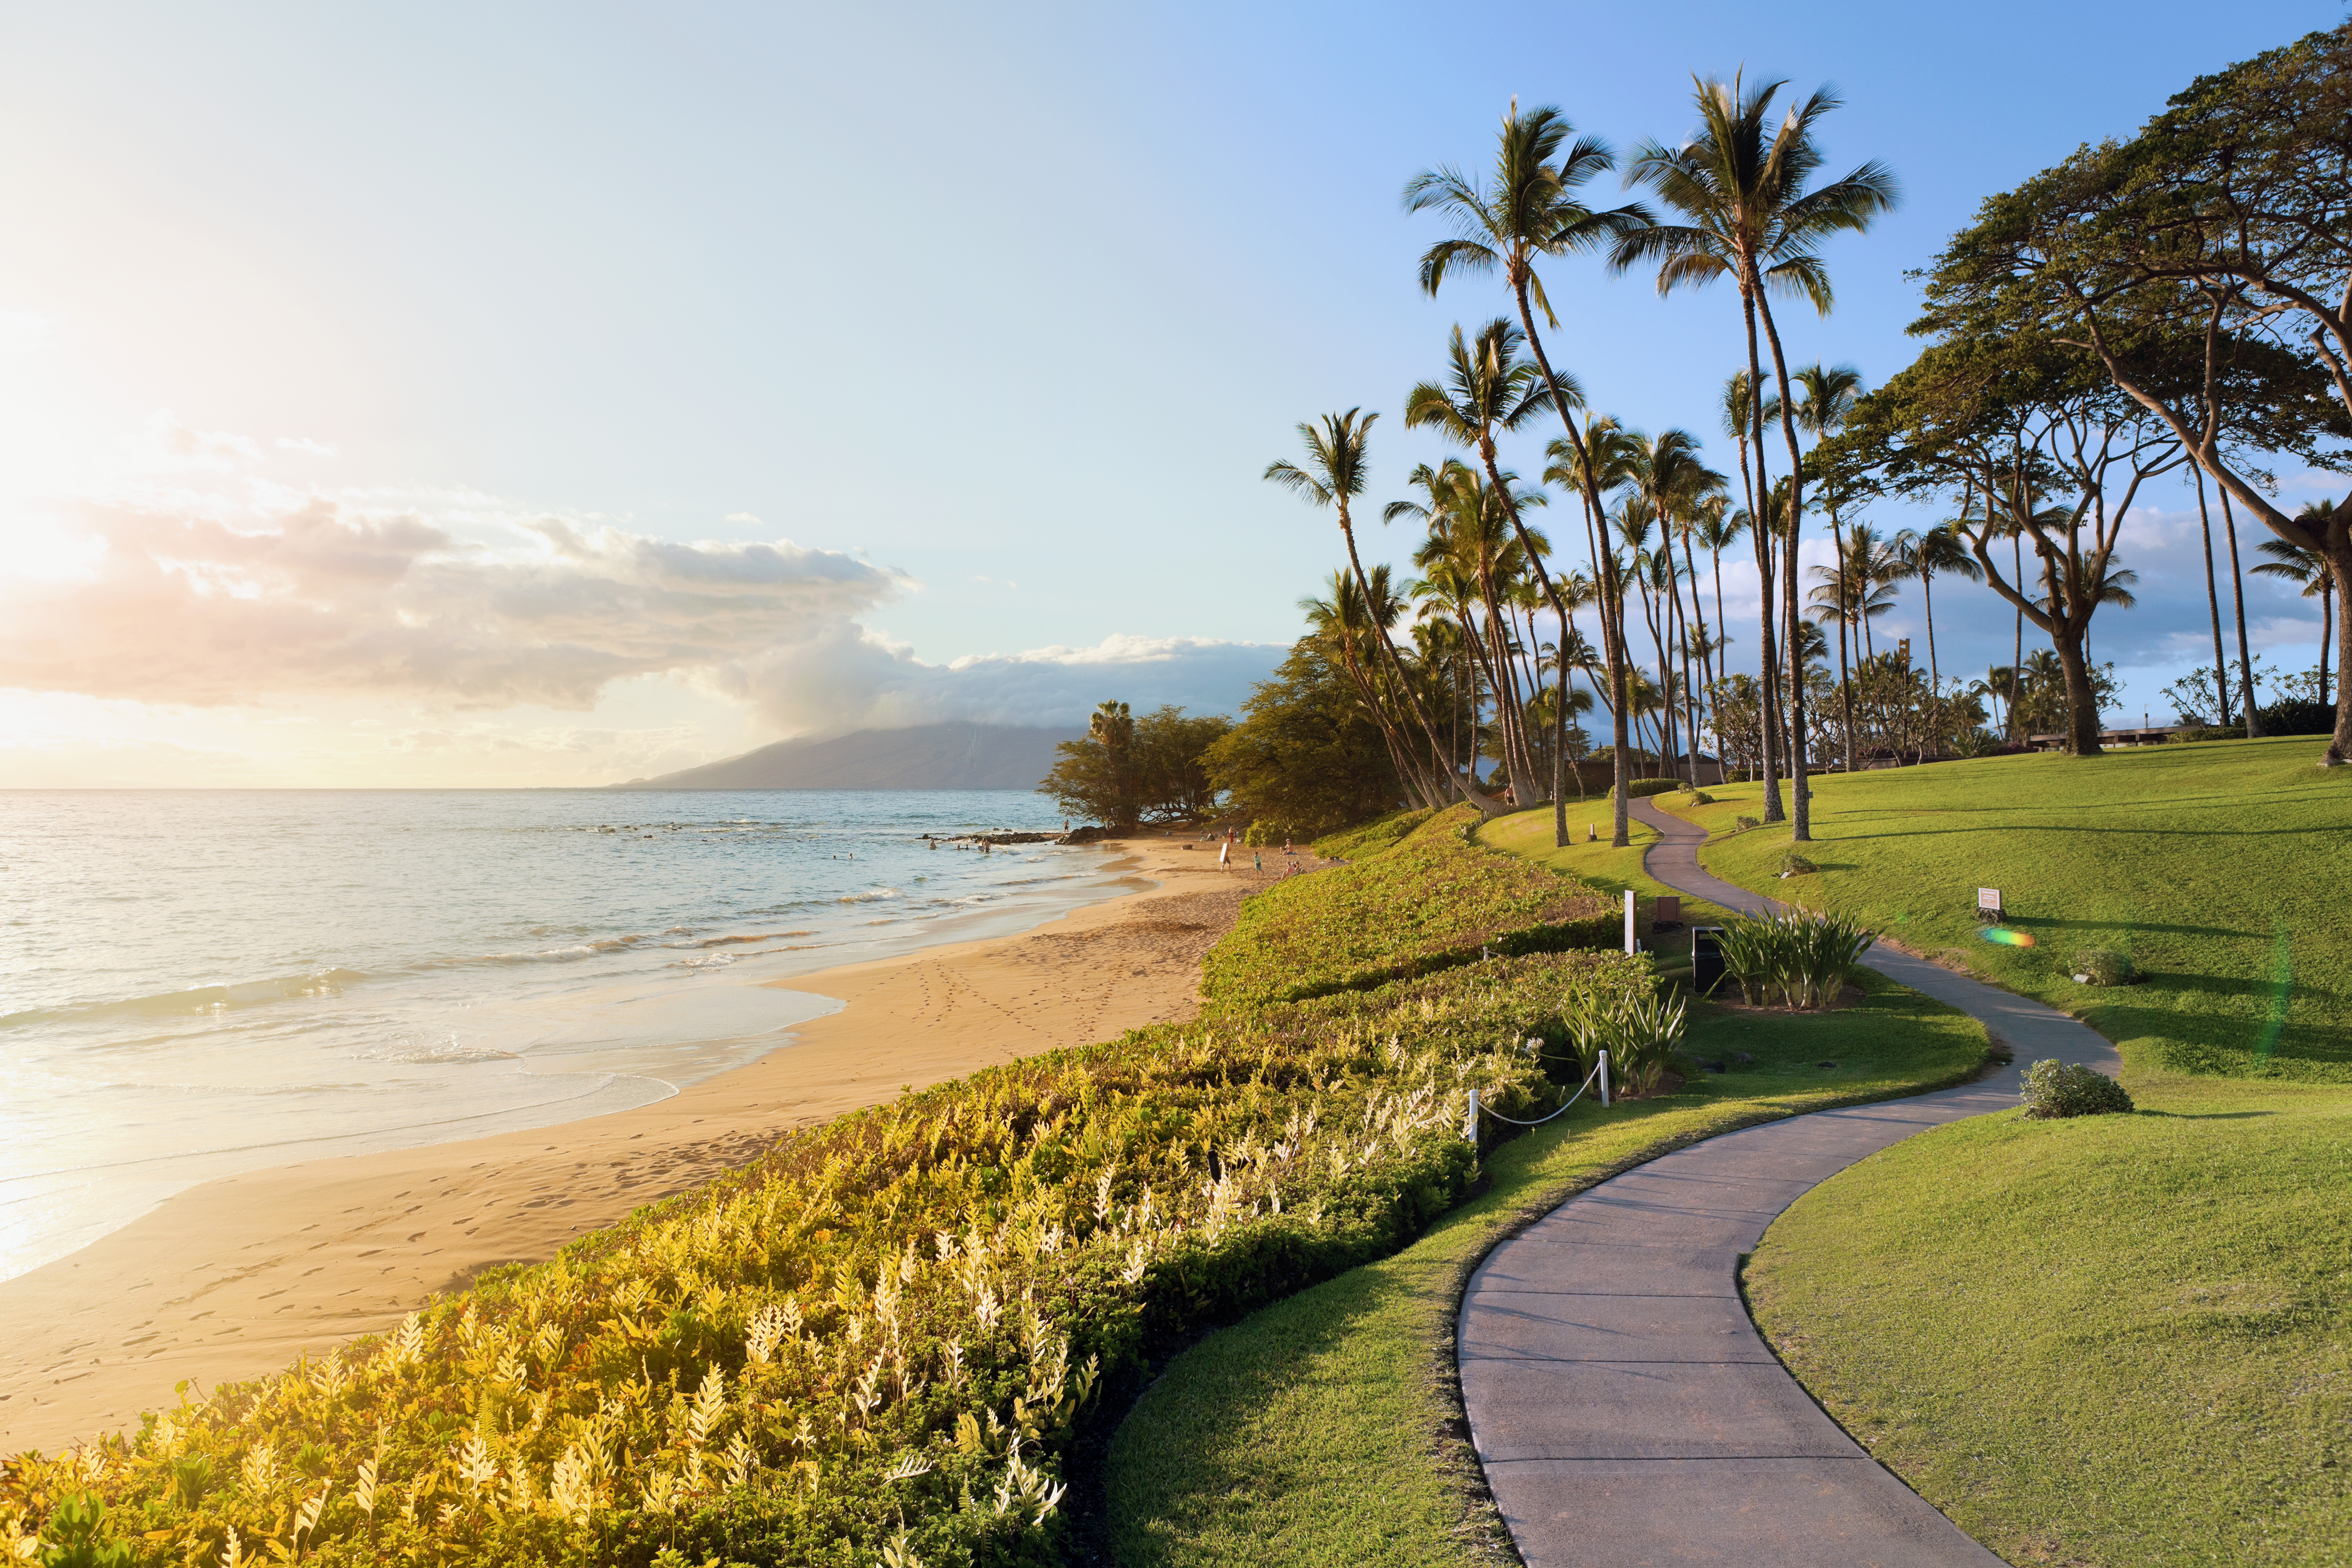 southwest airlines hawaii sale